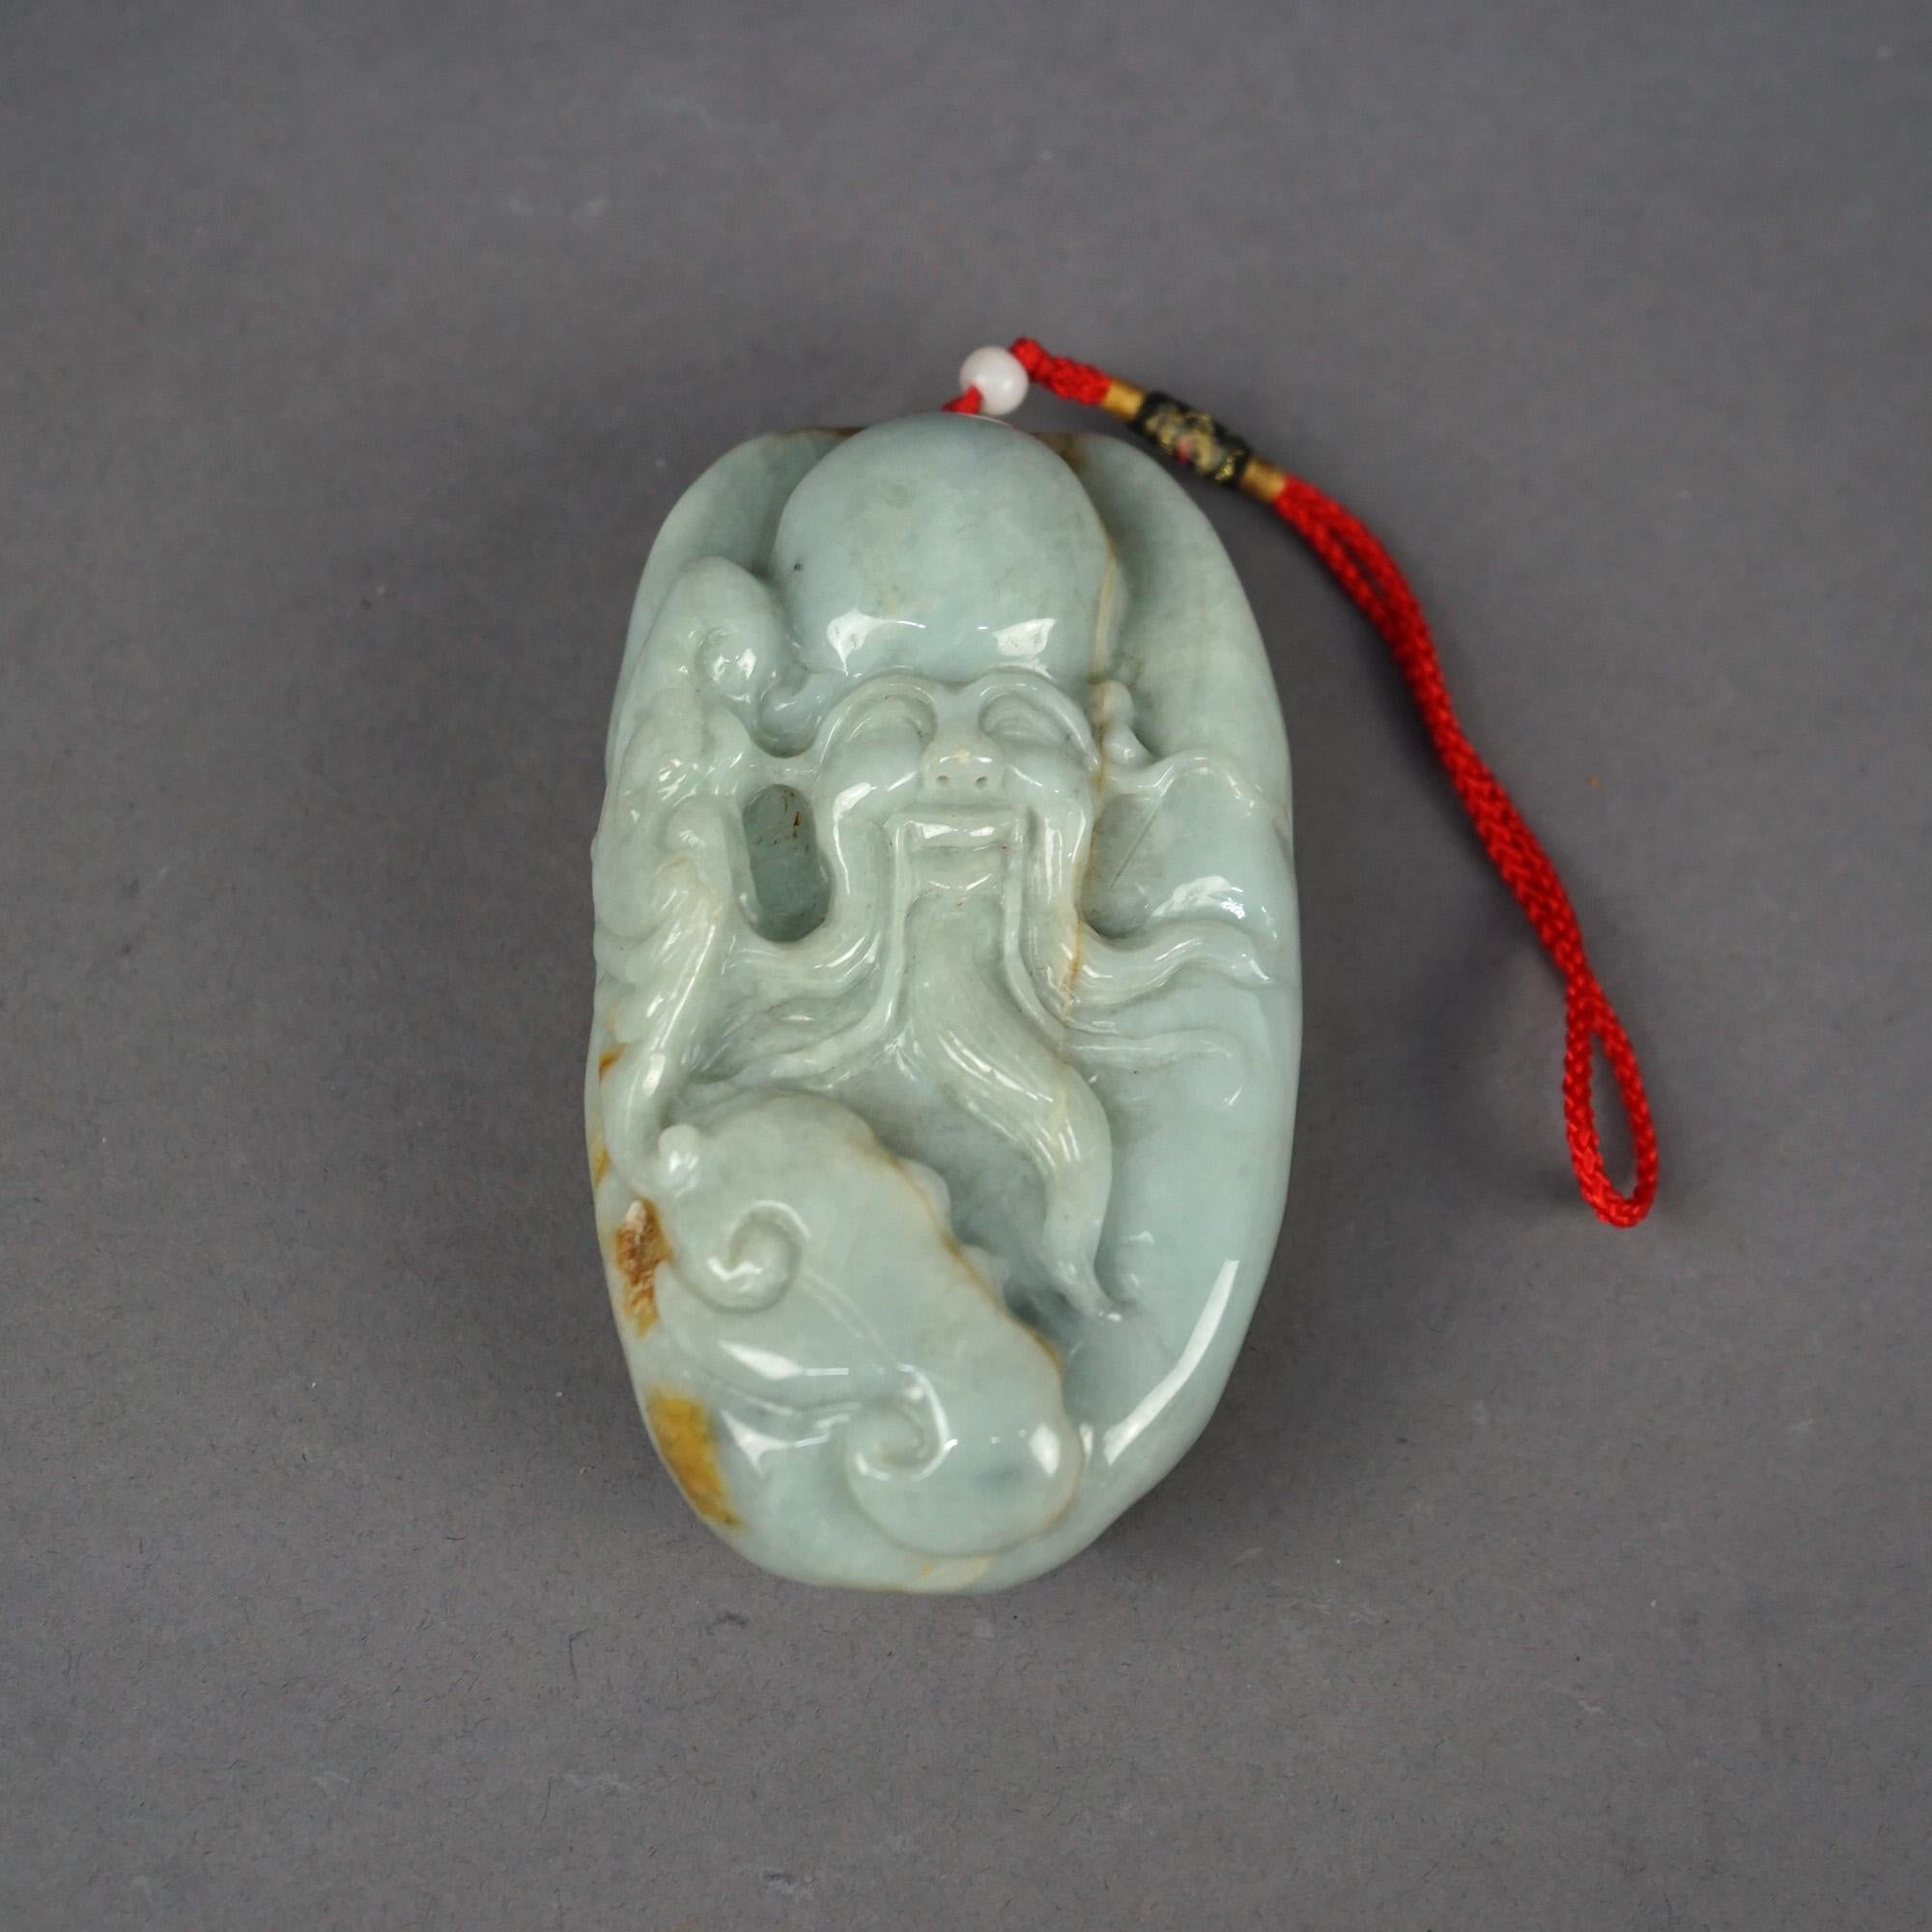 Antique Chinese Carved Celadon Jade Wise Man Octopus 19th C

Measures- 4.5''H x 2.5''W x 1.5''D